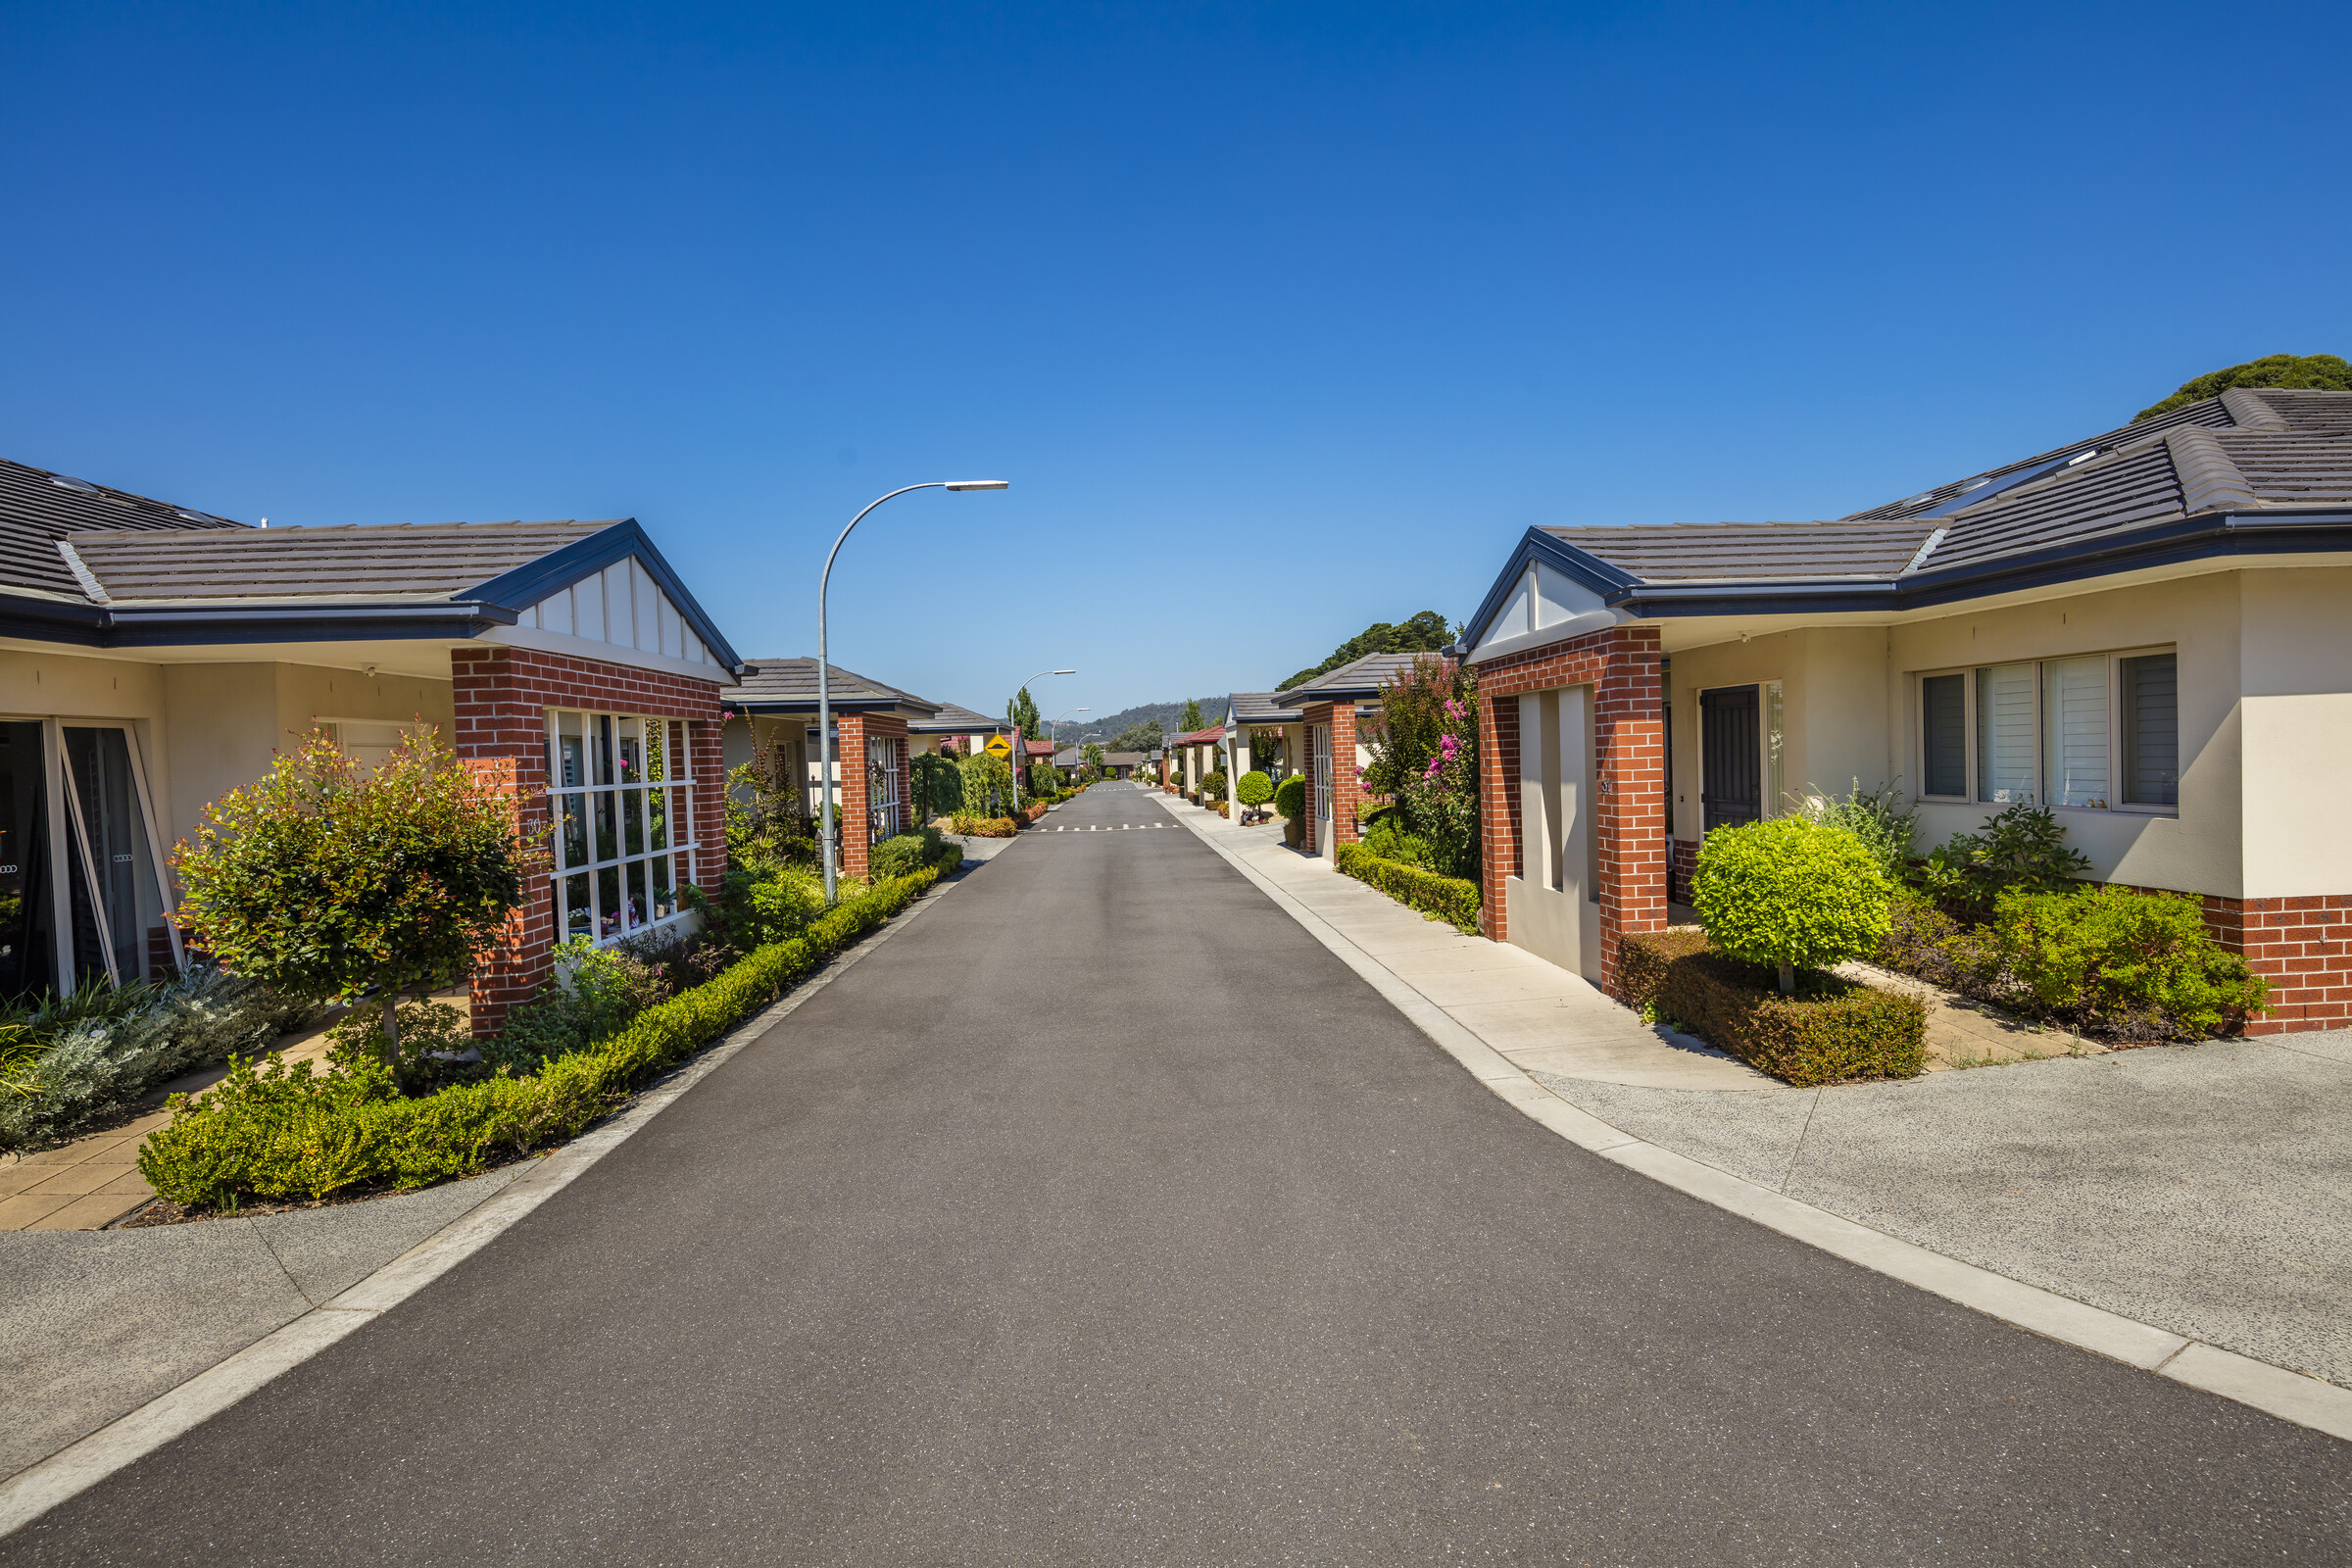 Waverley Country Club village roadway lined with homes, trees, gardens and lamp posts